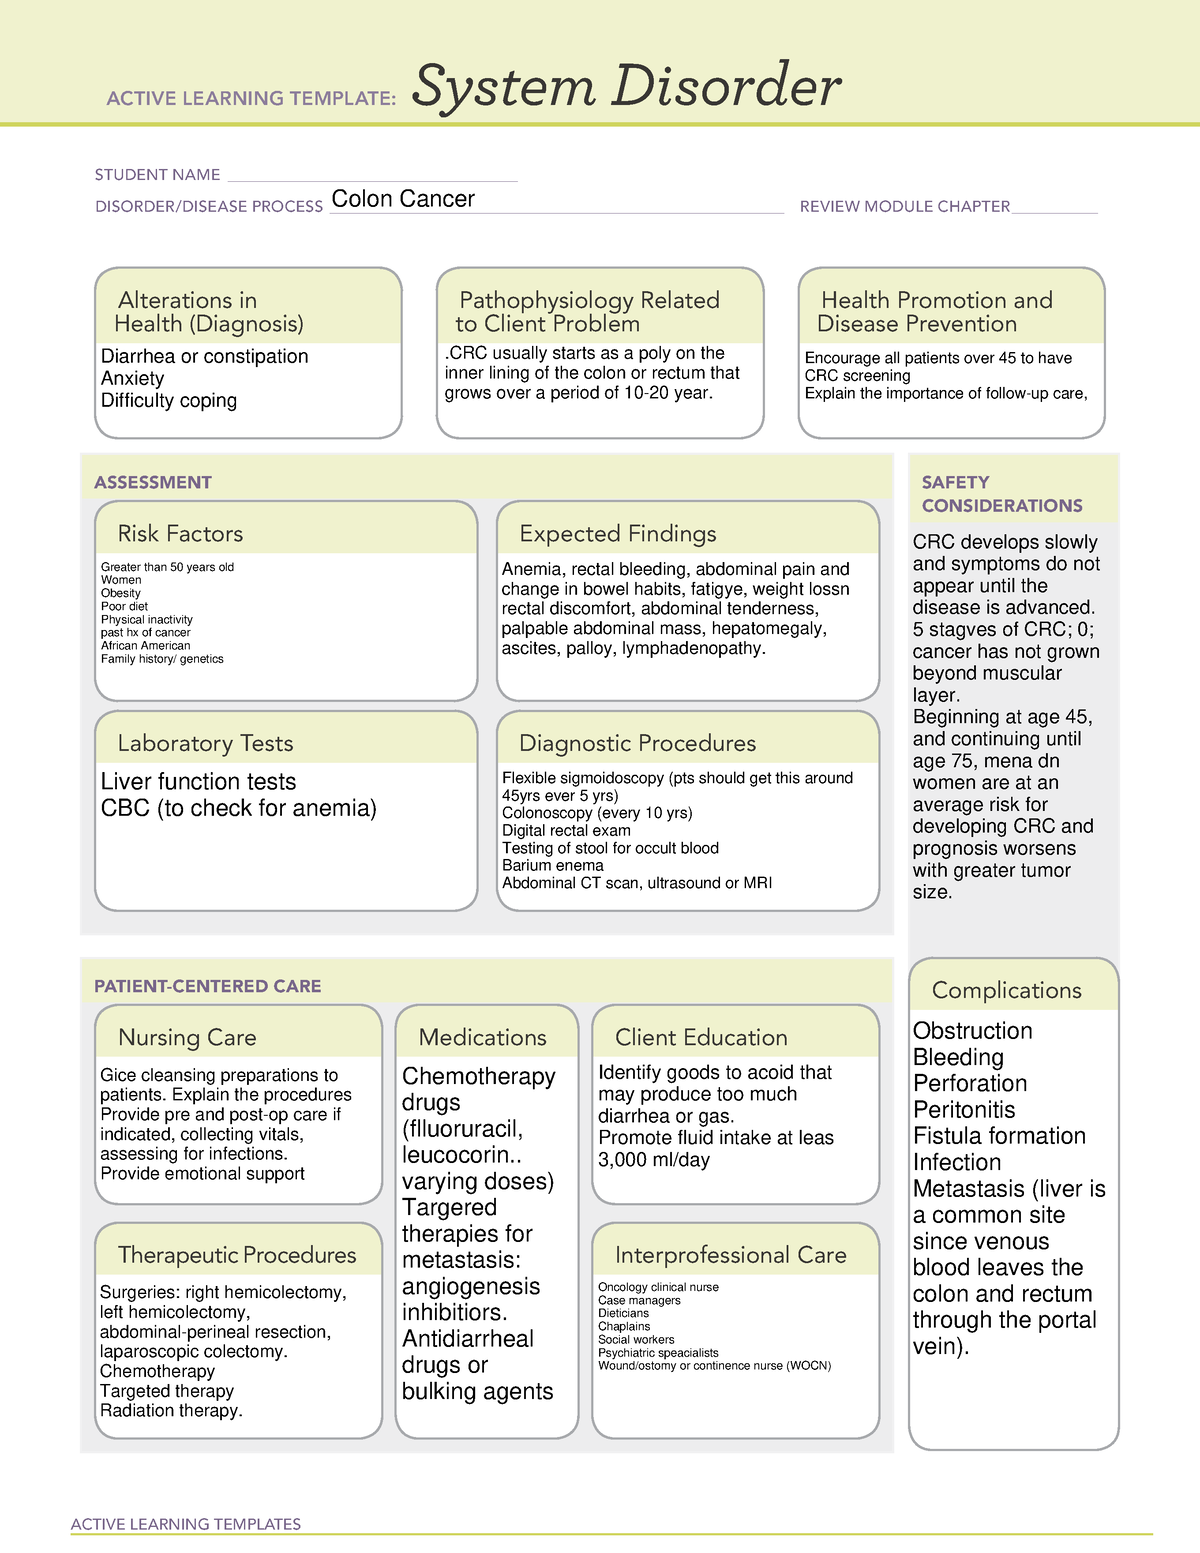 system-disorder-colon-cancer-active-learning-templates-system